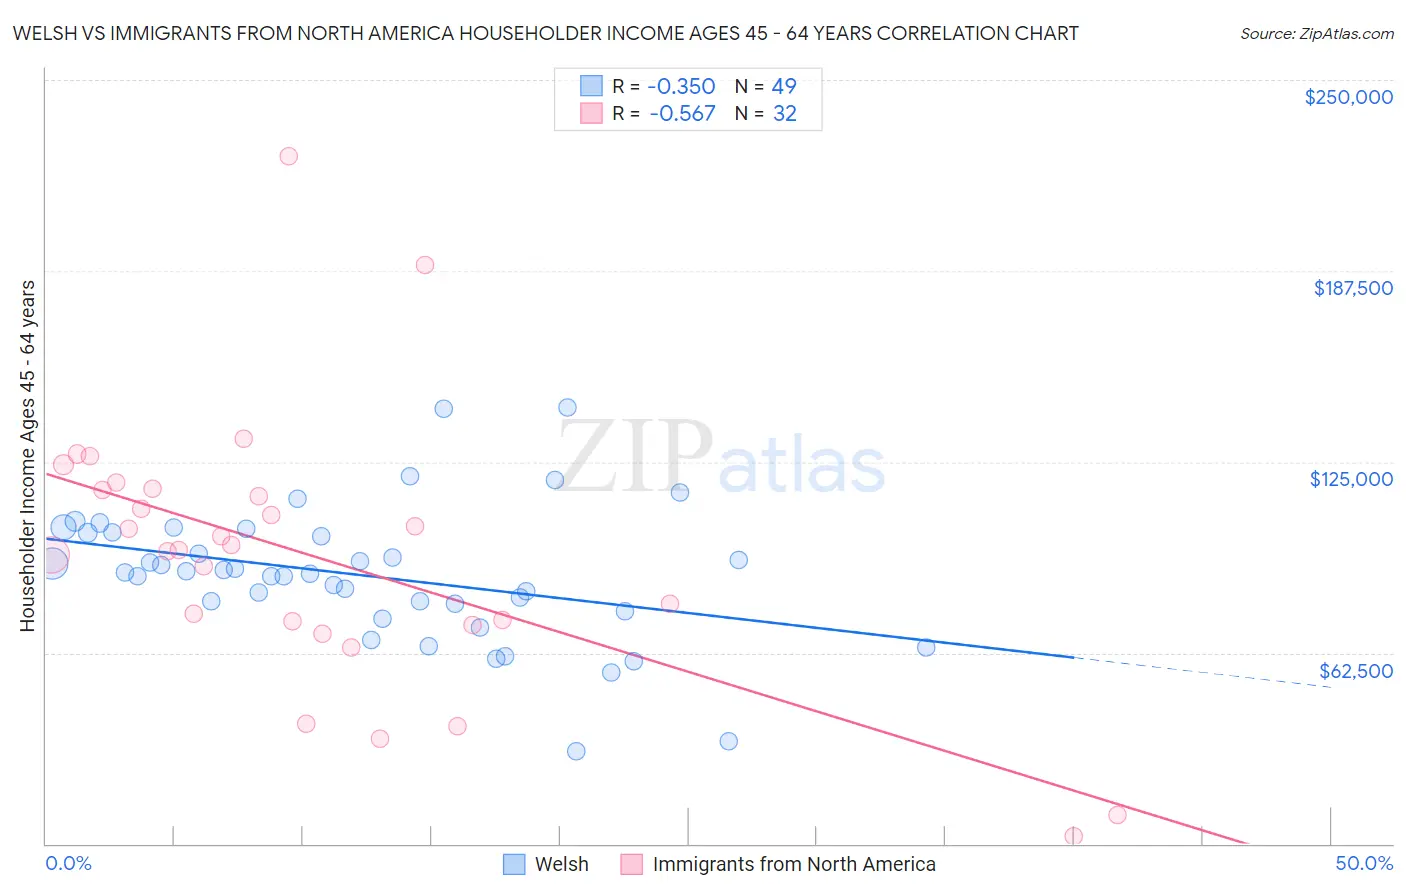 Welsh vs Immigrants from North America Householder Income Ages 45 - 64 years